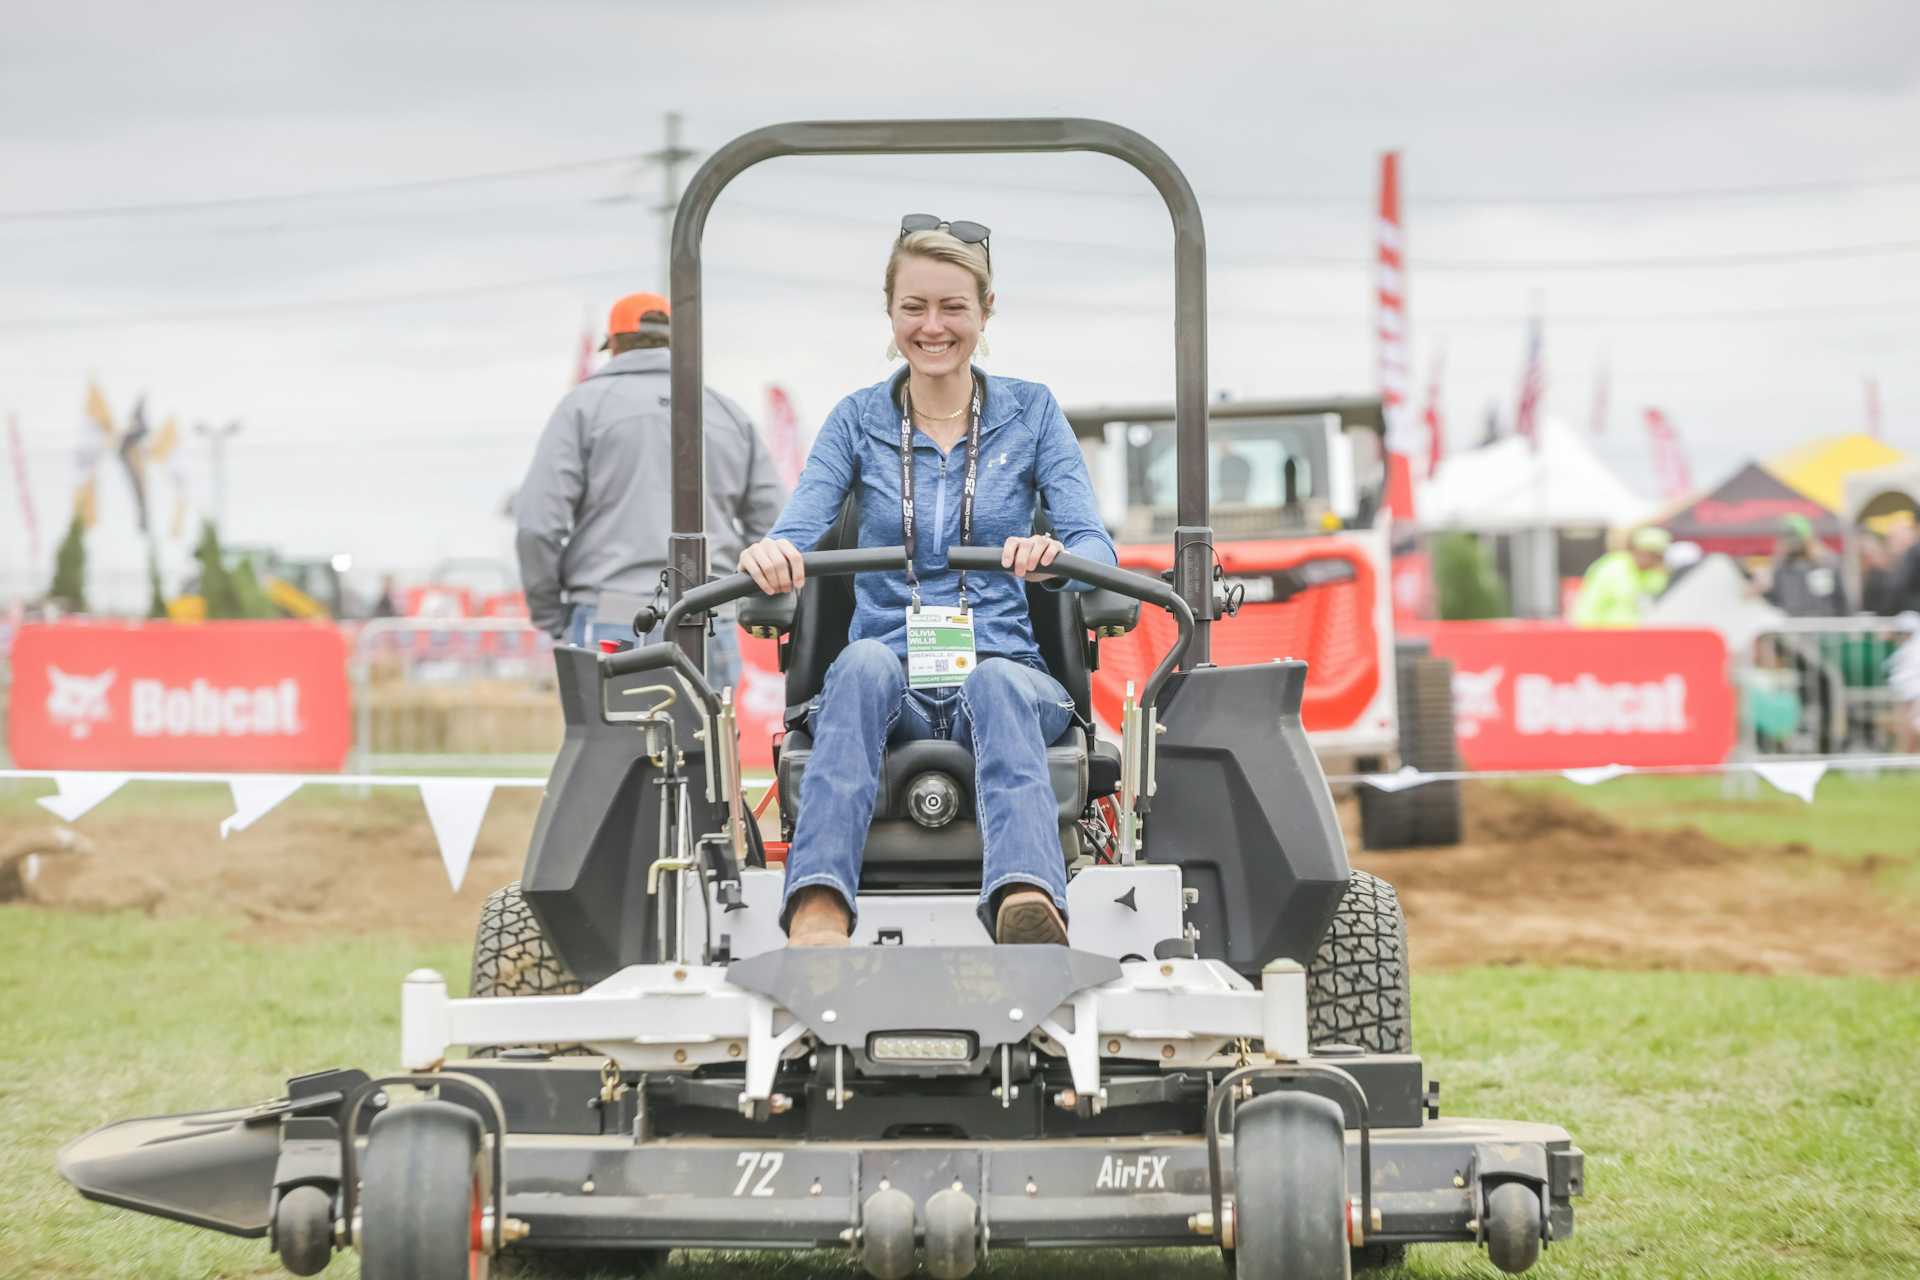 The Dirt on the Equip Exposition Demo Yard: At Nearly 30 Acres, Landscapers and Other Attendees Can Test Innovative Equipment-c3065a10-f6f1-4eb6-abf5-85080dc313fb